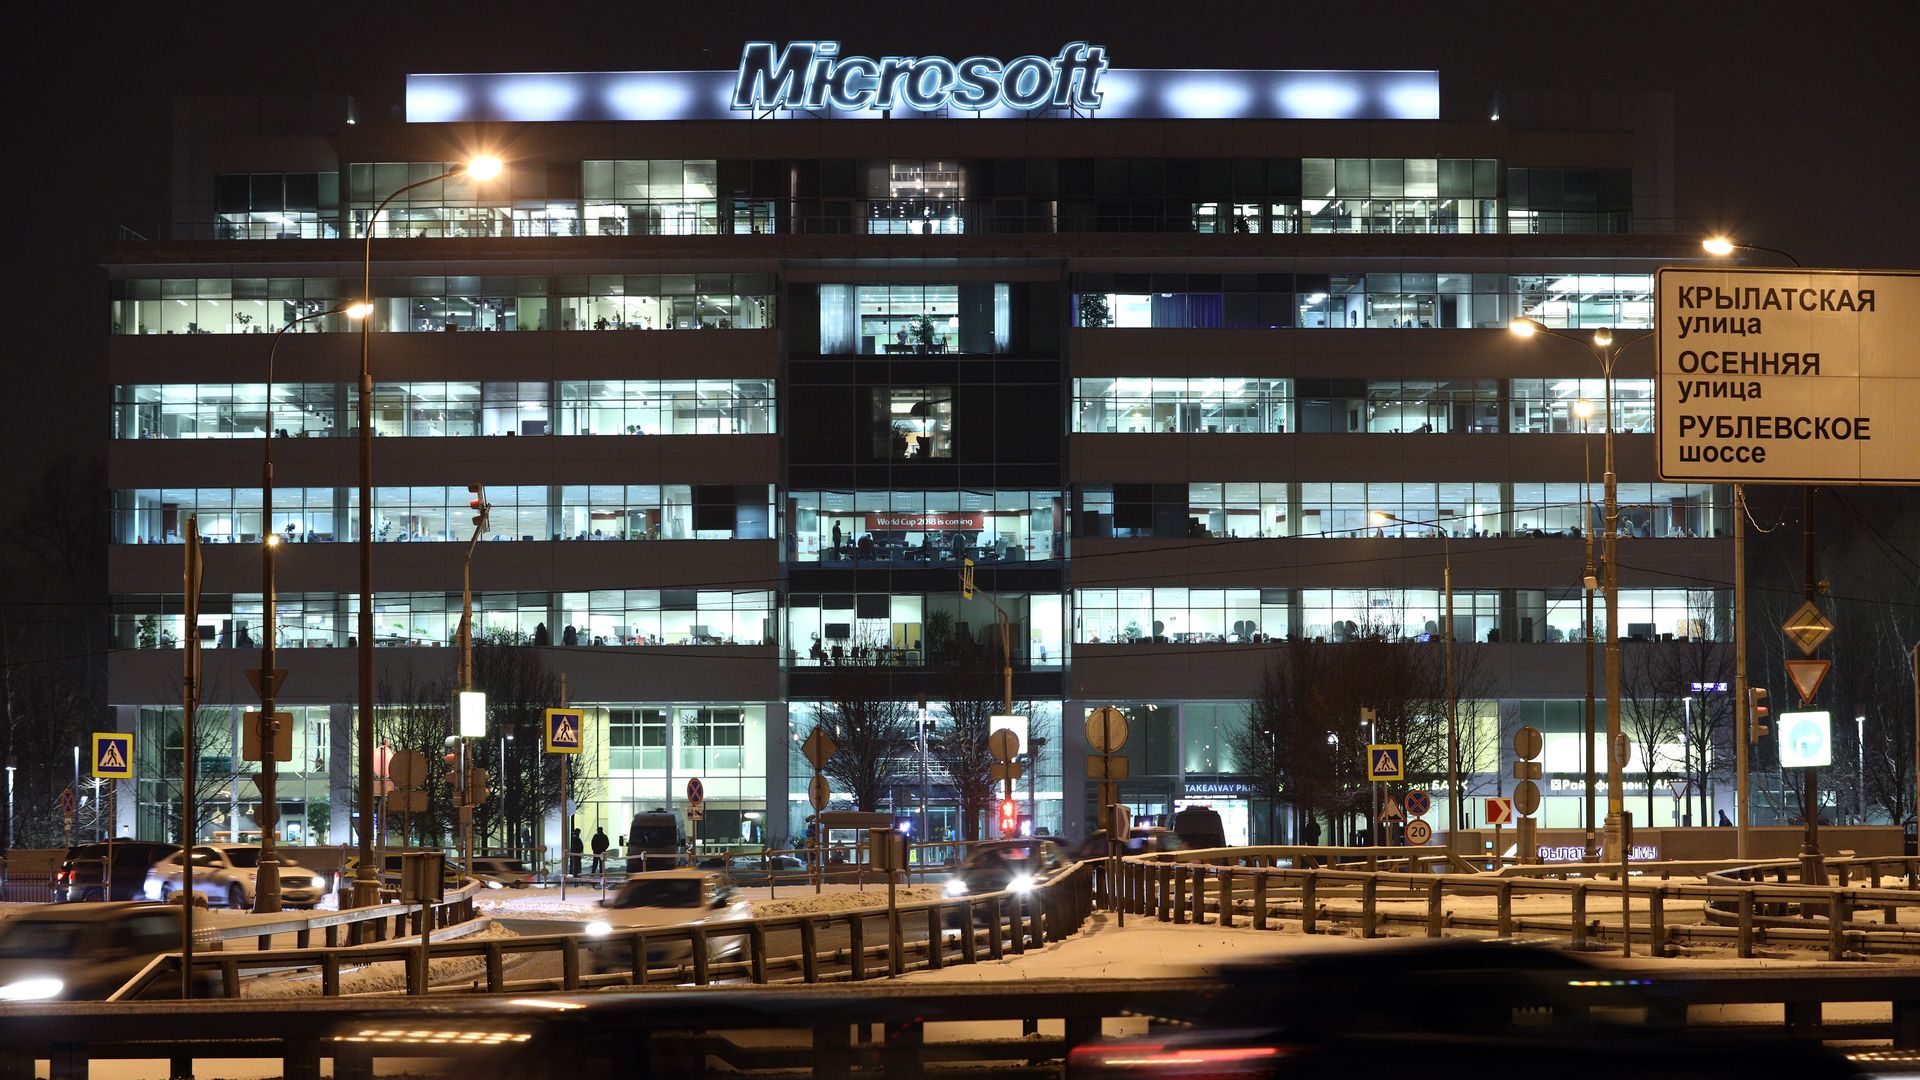 Microsoft's Russian headquarters office building at night